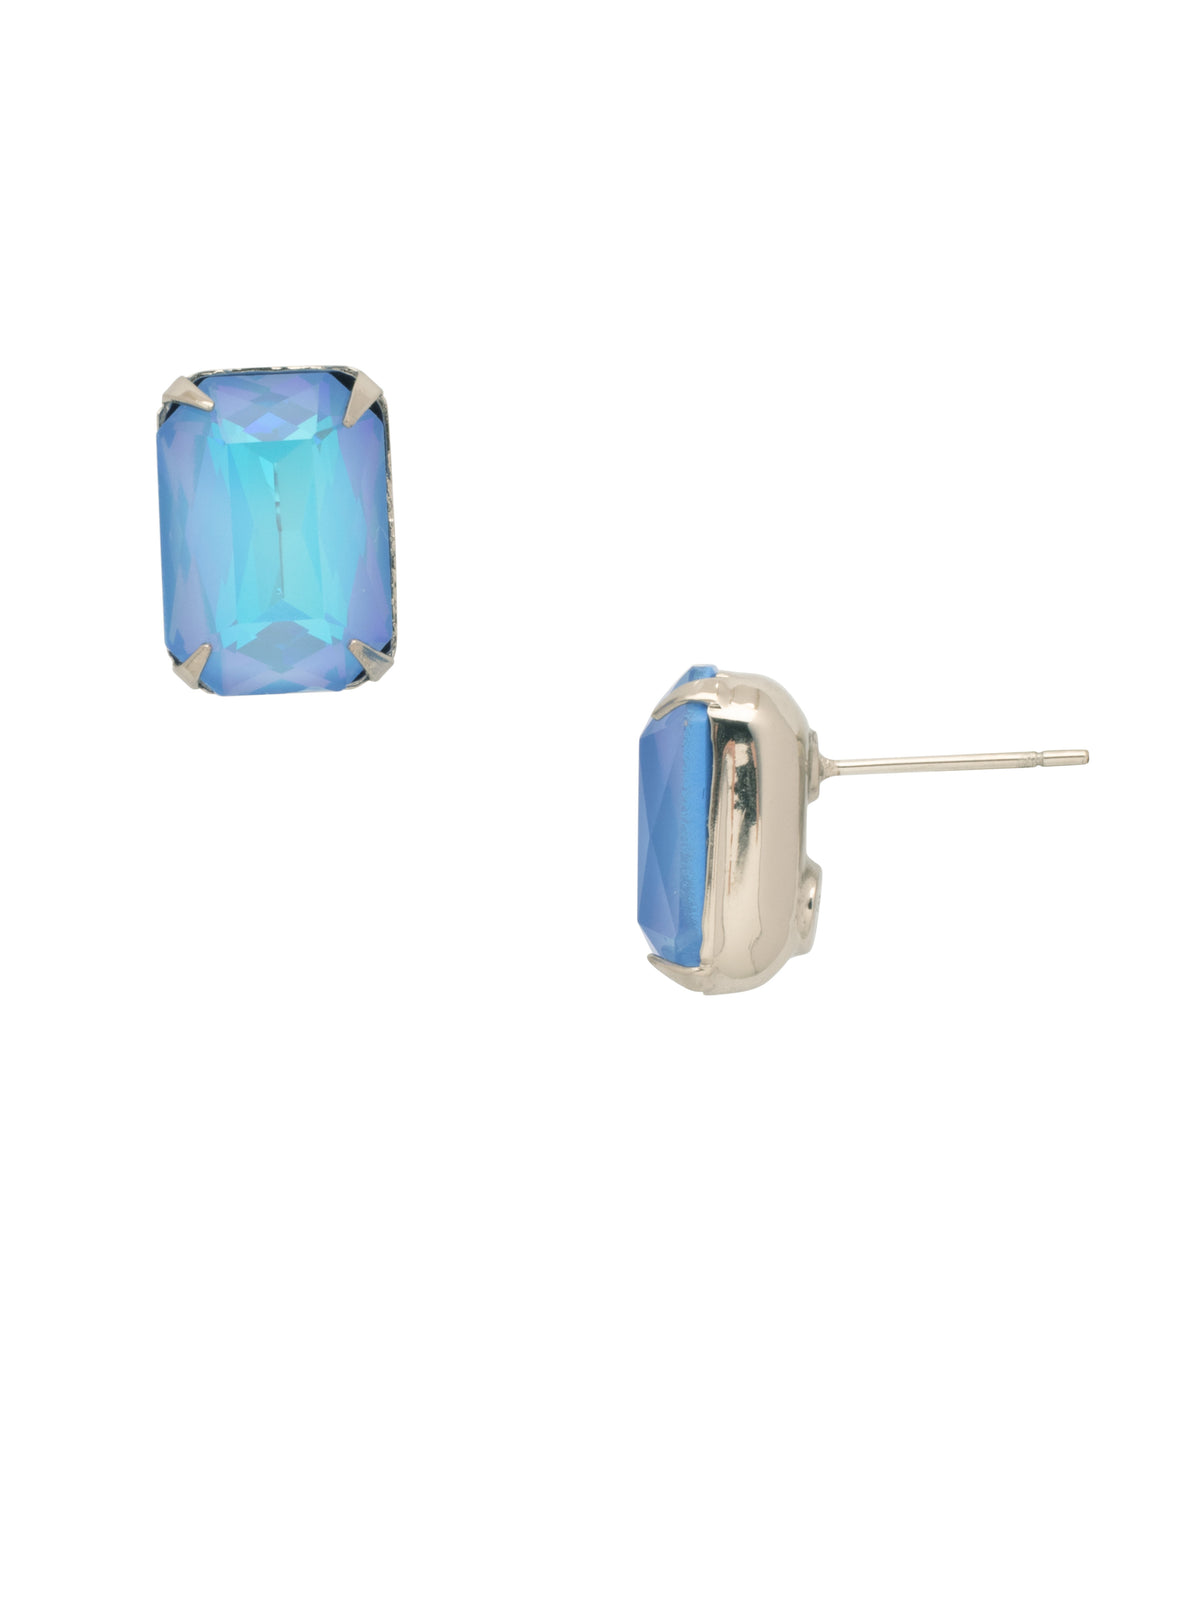 Everyday Stud Earrings - ECT11PDOCD - <p>Simple studs never go out of style! Try this single cut crystal on a post for everyday sparkle. From Sorrelli's Ocean Delite collection in our Palladium finish.</p>